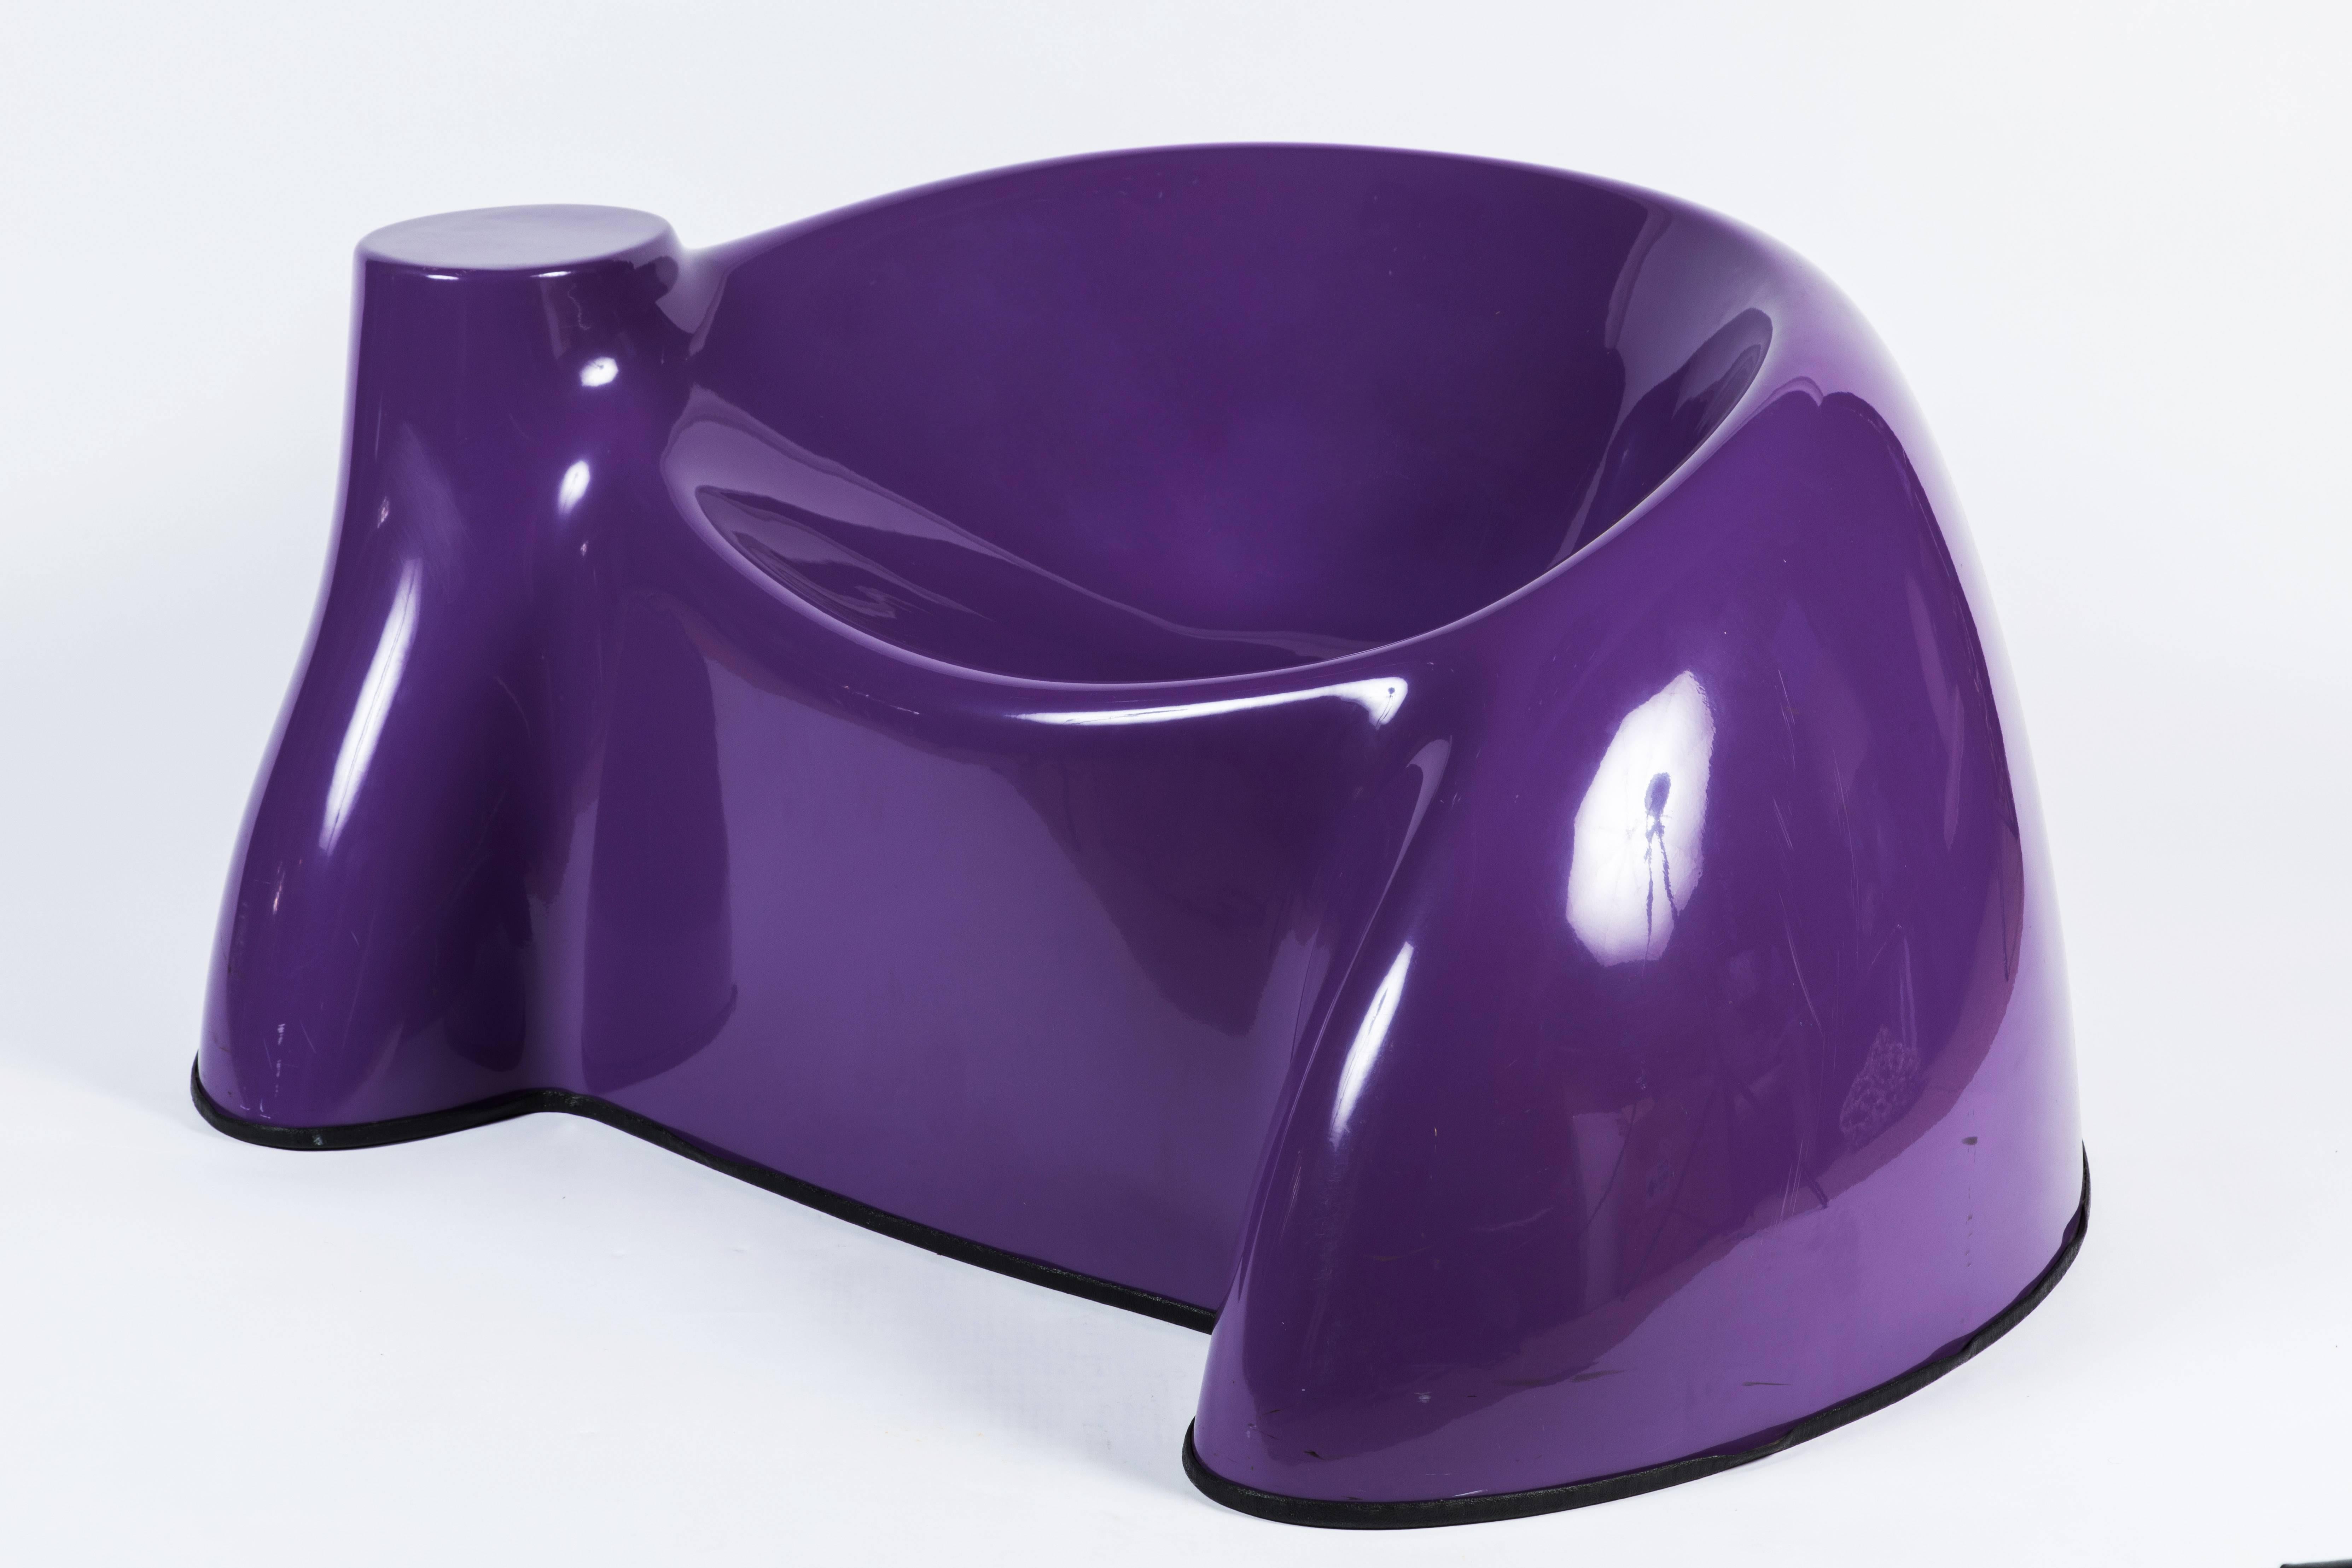 Purple fiberglass castle chair from Wendell Castle's iconic Molar Series.